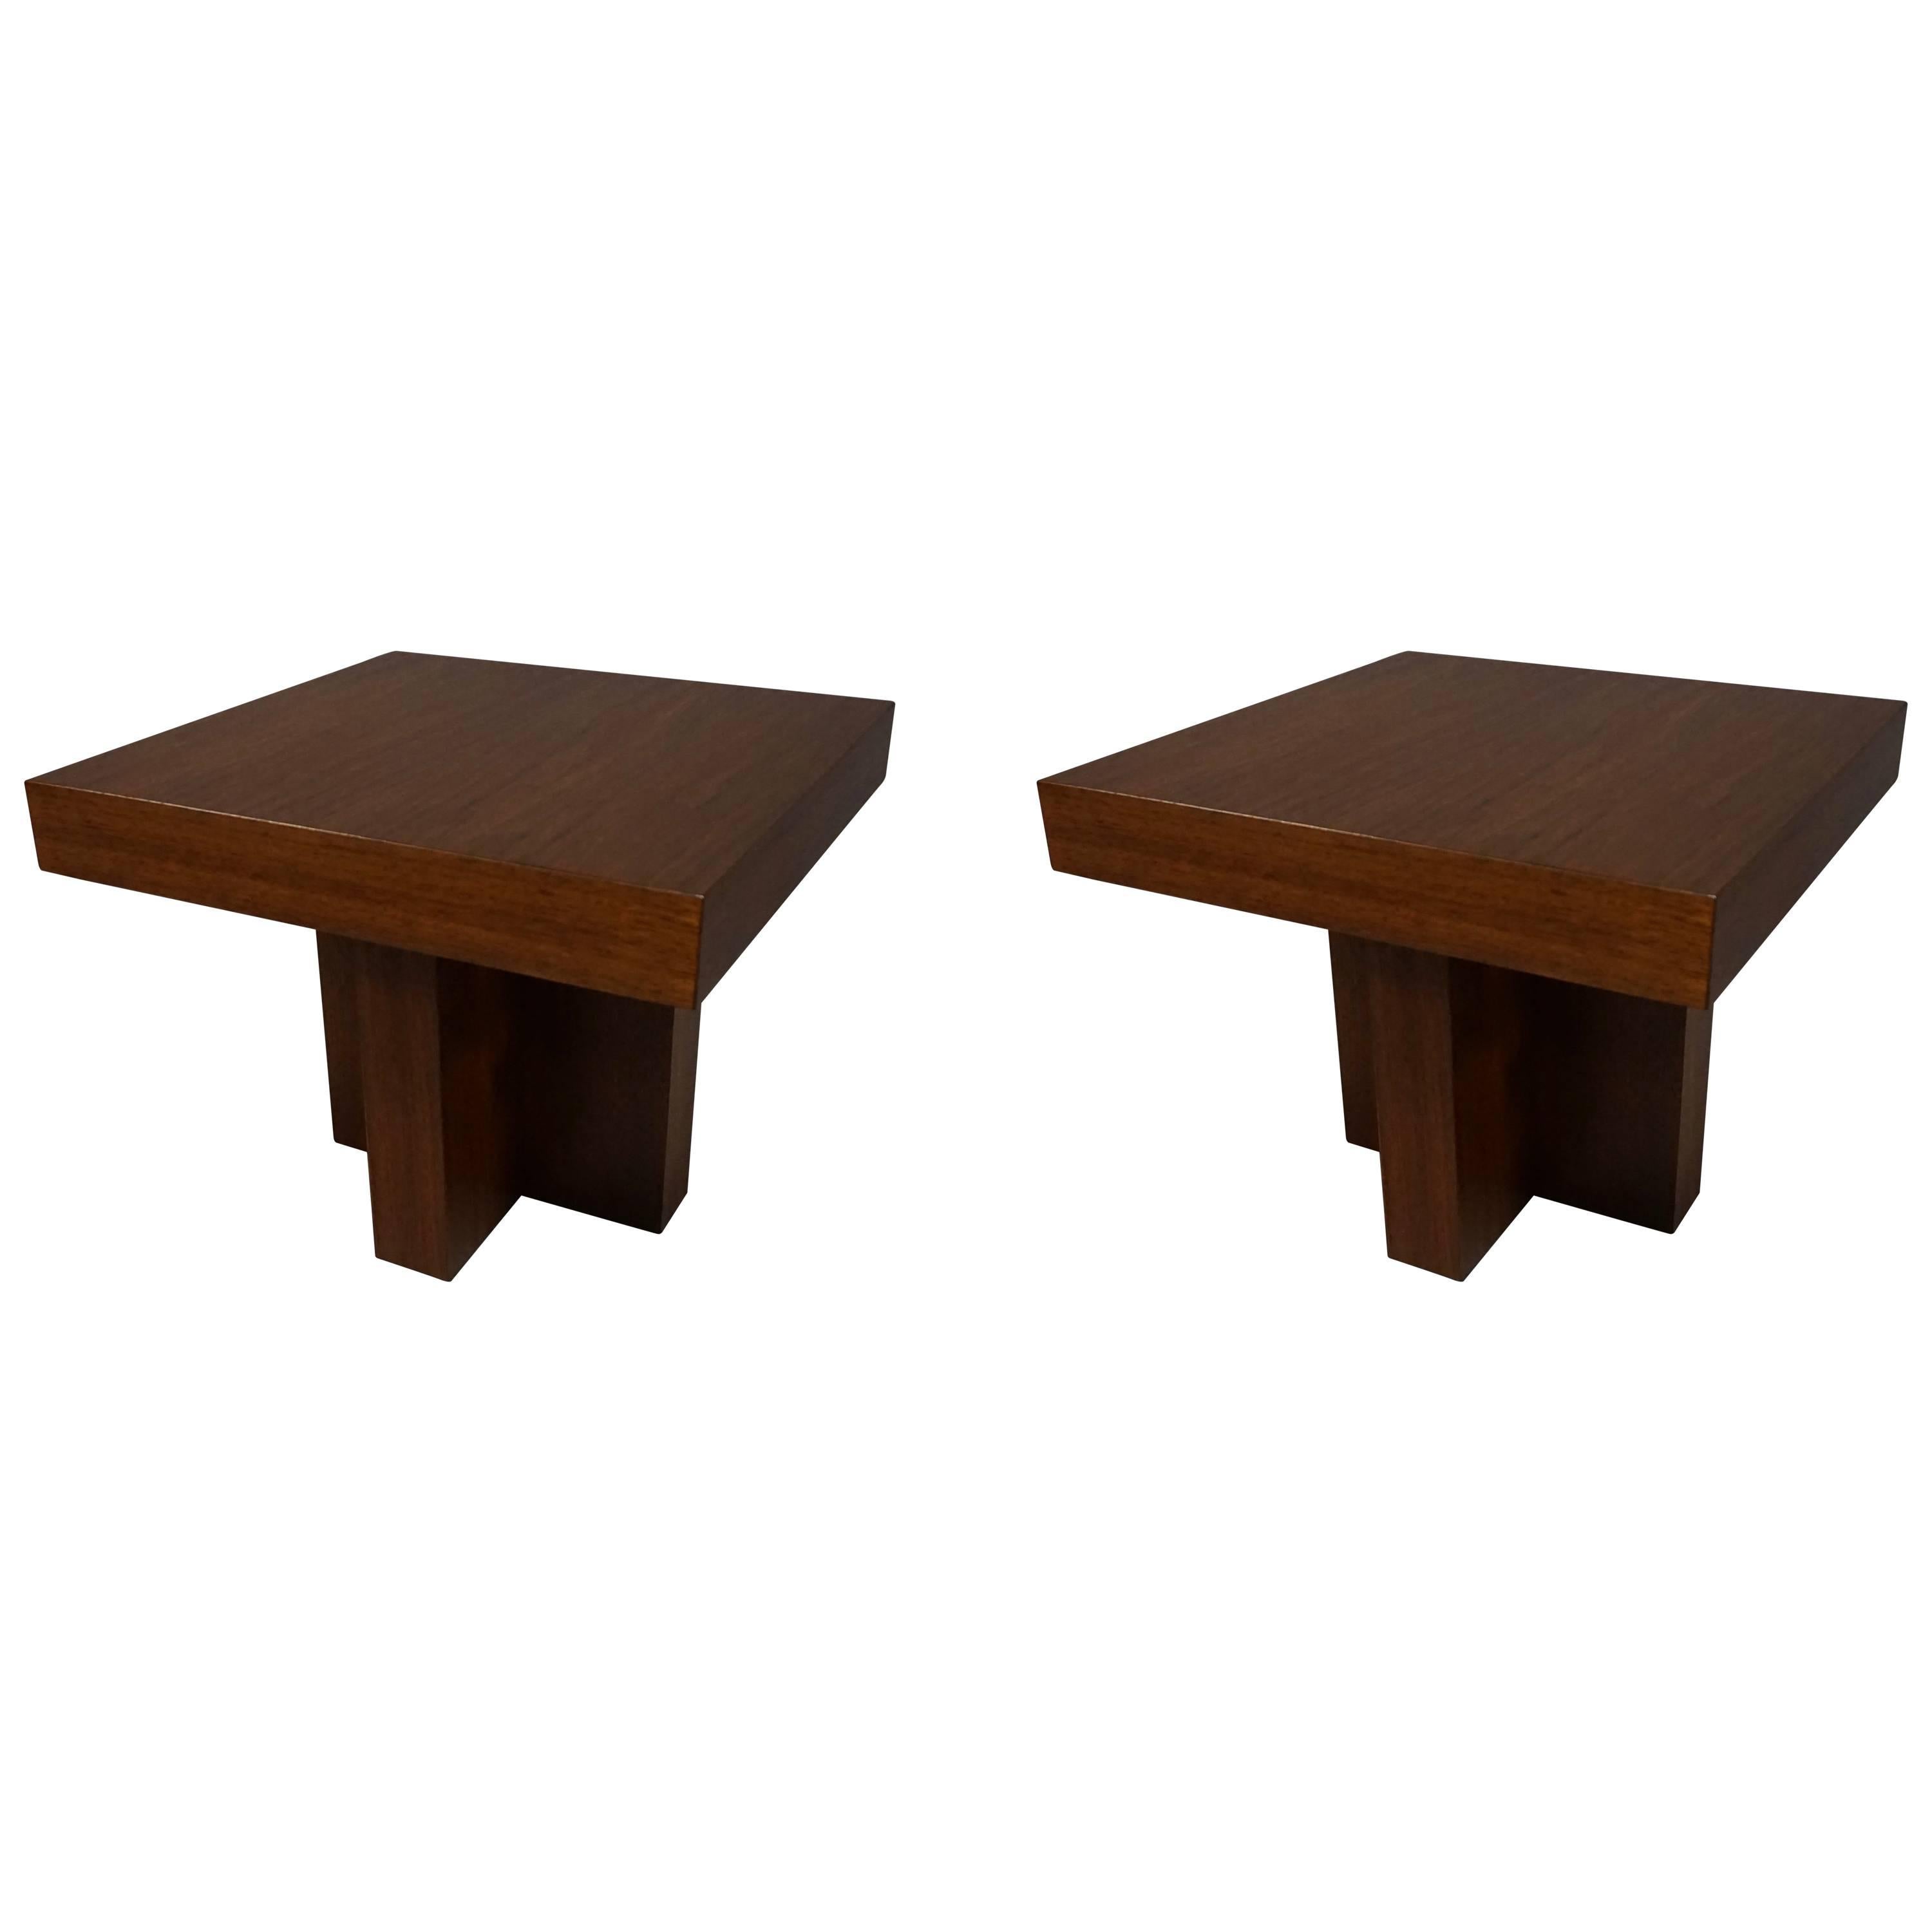 1950s Pair of Cruciform Stands, Adrian Pearsall for Craft Associates